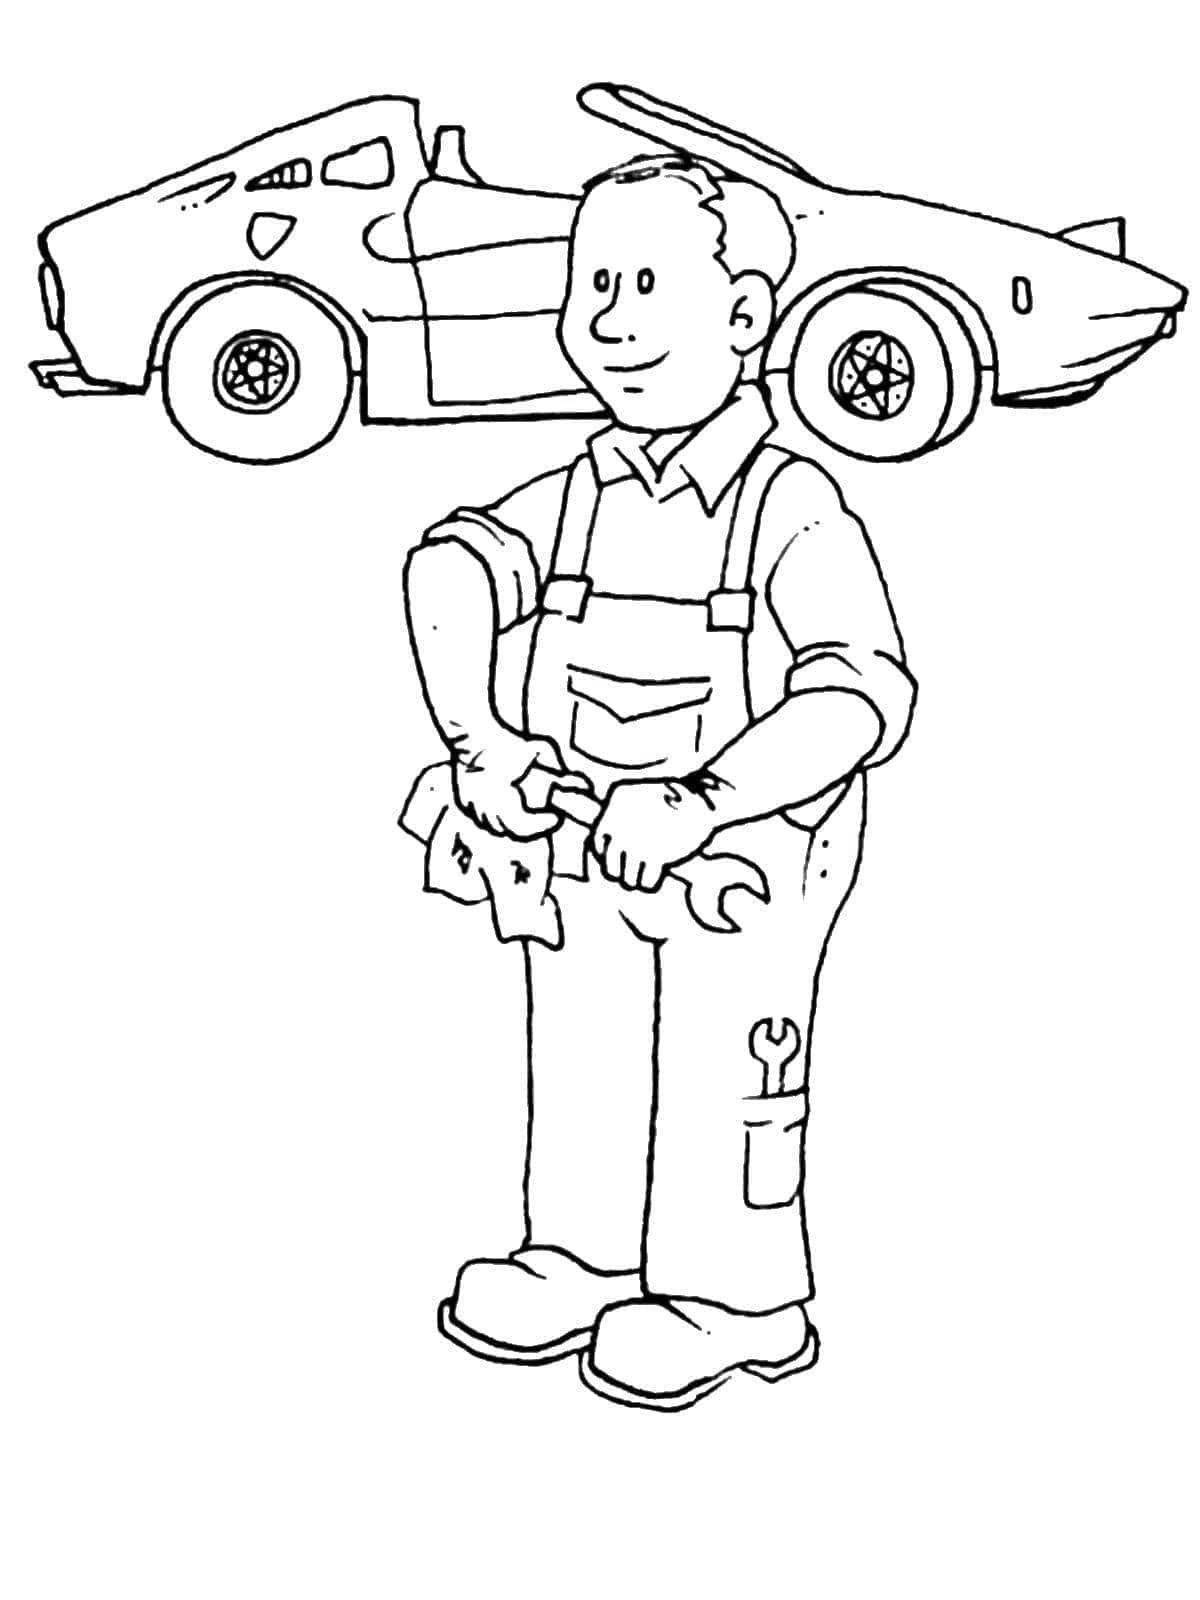 Color-frenzy car service coloring page